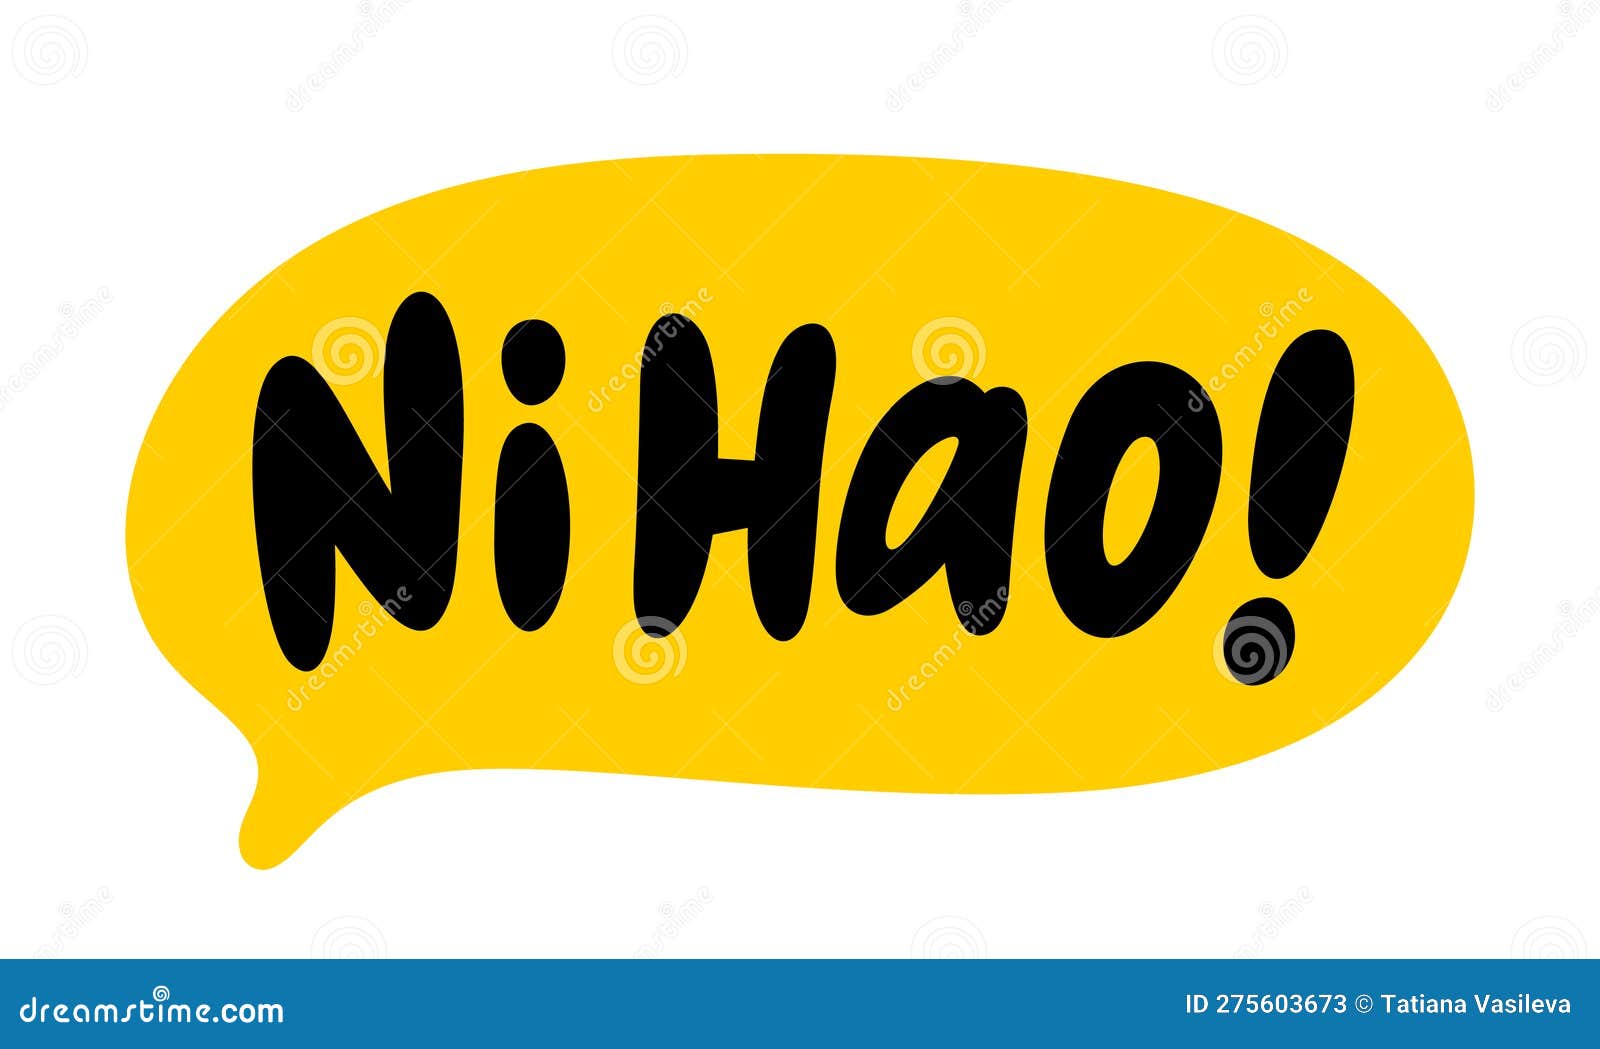 ni hao speech bubble. ni hao is hello in chinese. lettering text doodle phrase.  